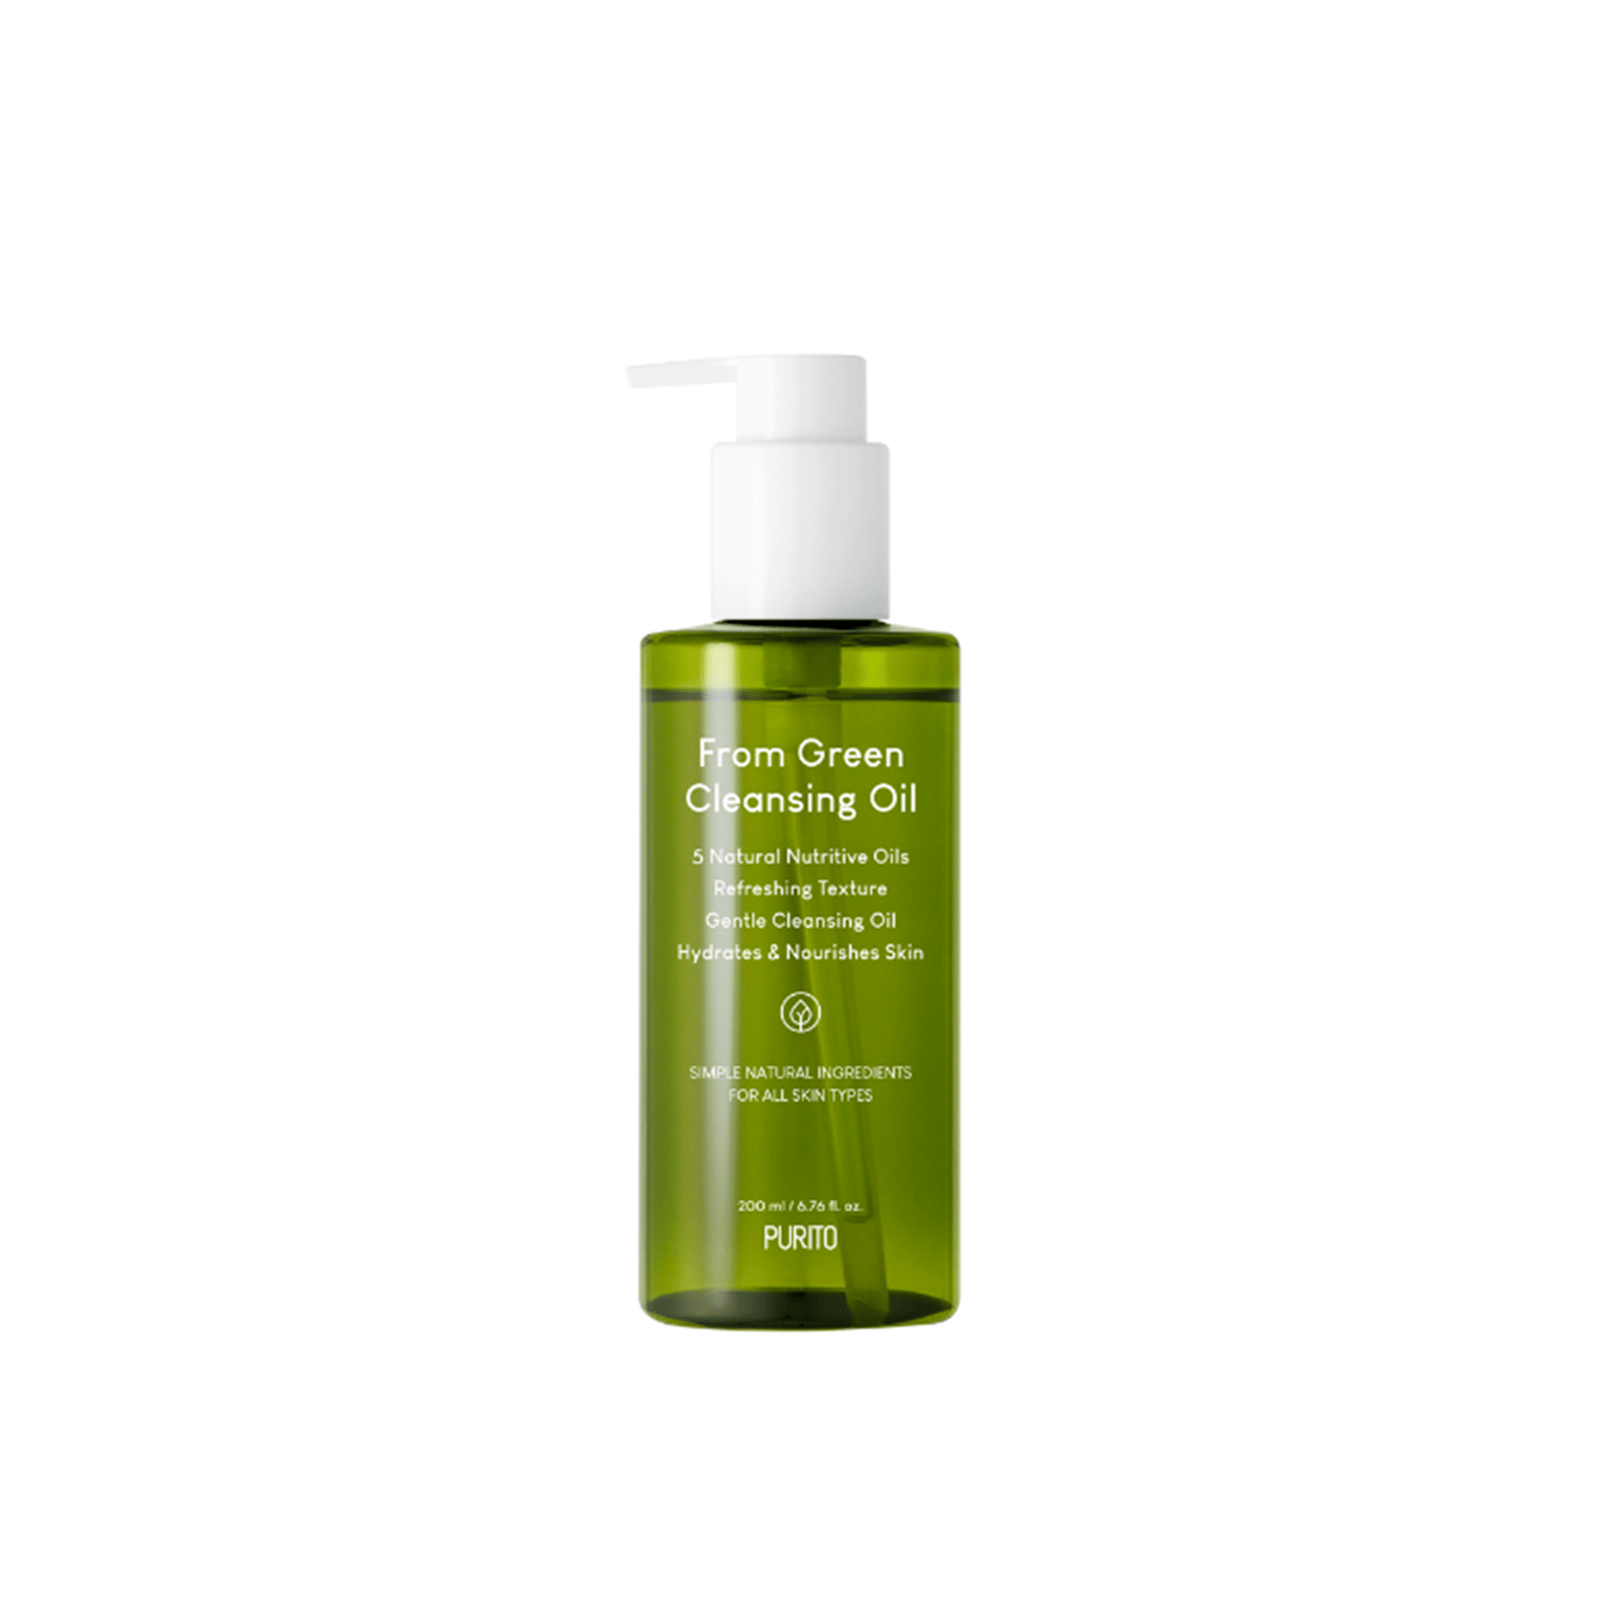 PURITO From Green Cleansing Oil 200ml (6.76 fl oz)